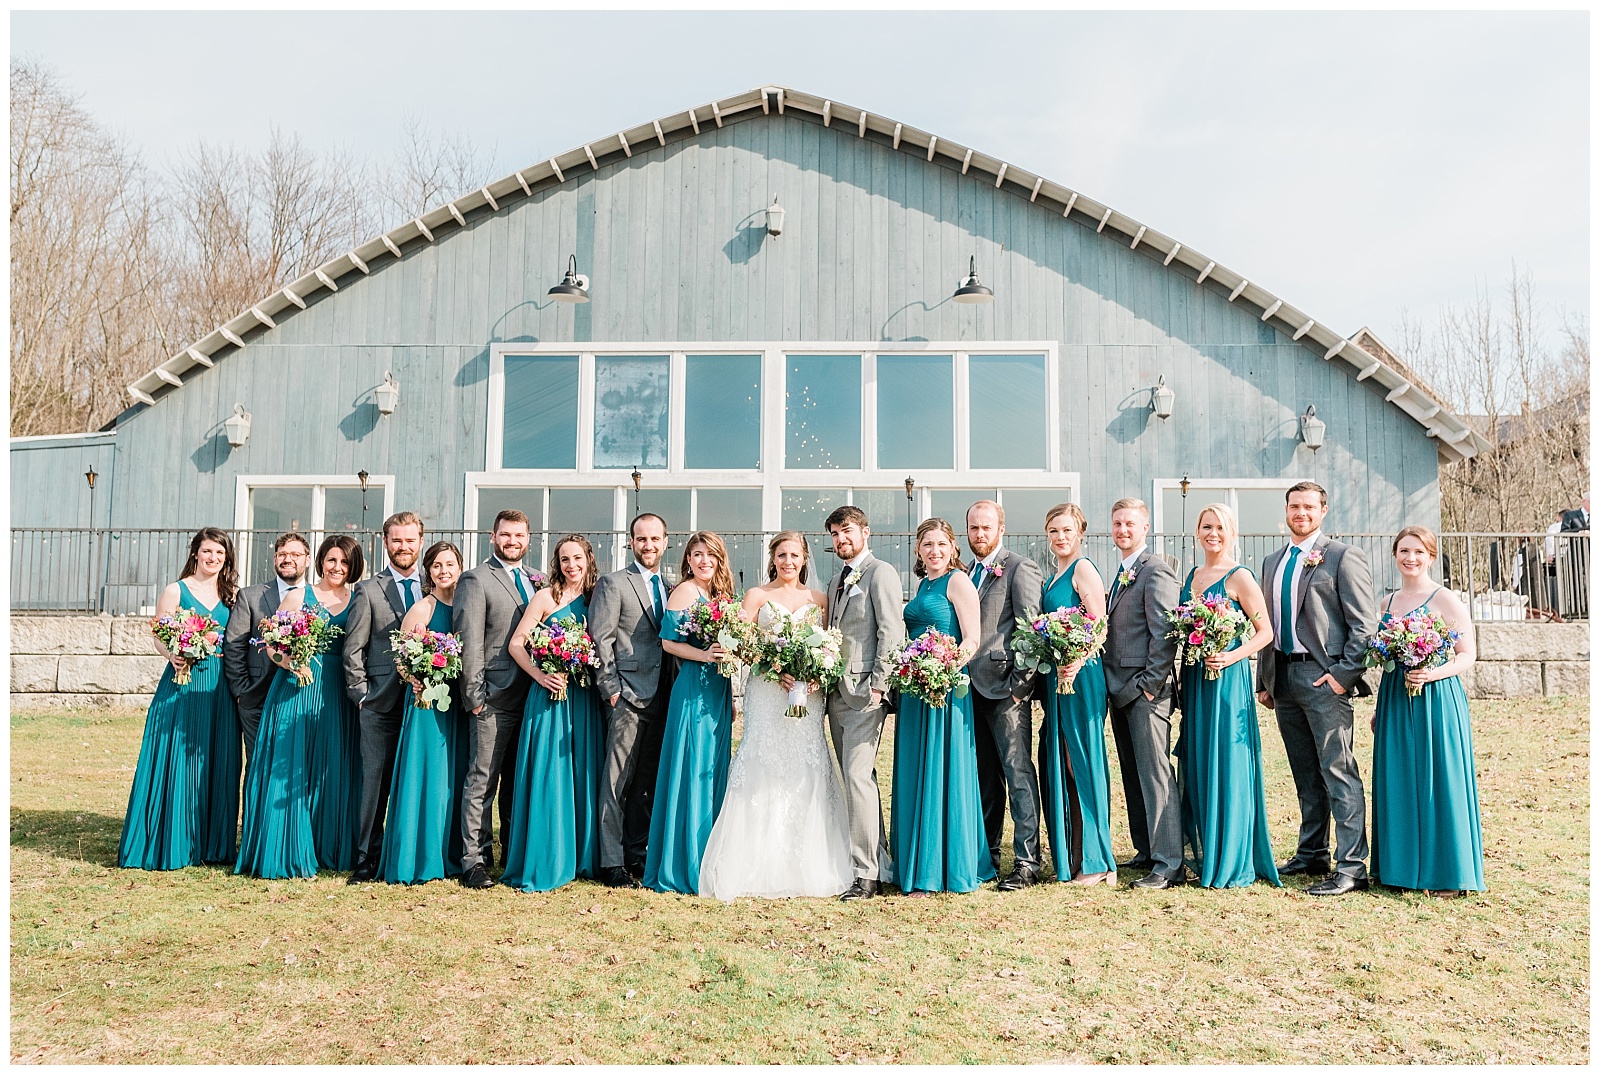 A wedding party of bridesmaids wearing teal dresses and groomsmen wearing grey suits, in front of the Lake House Inn wedding venue in Pennsylvania.